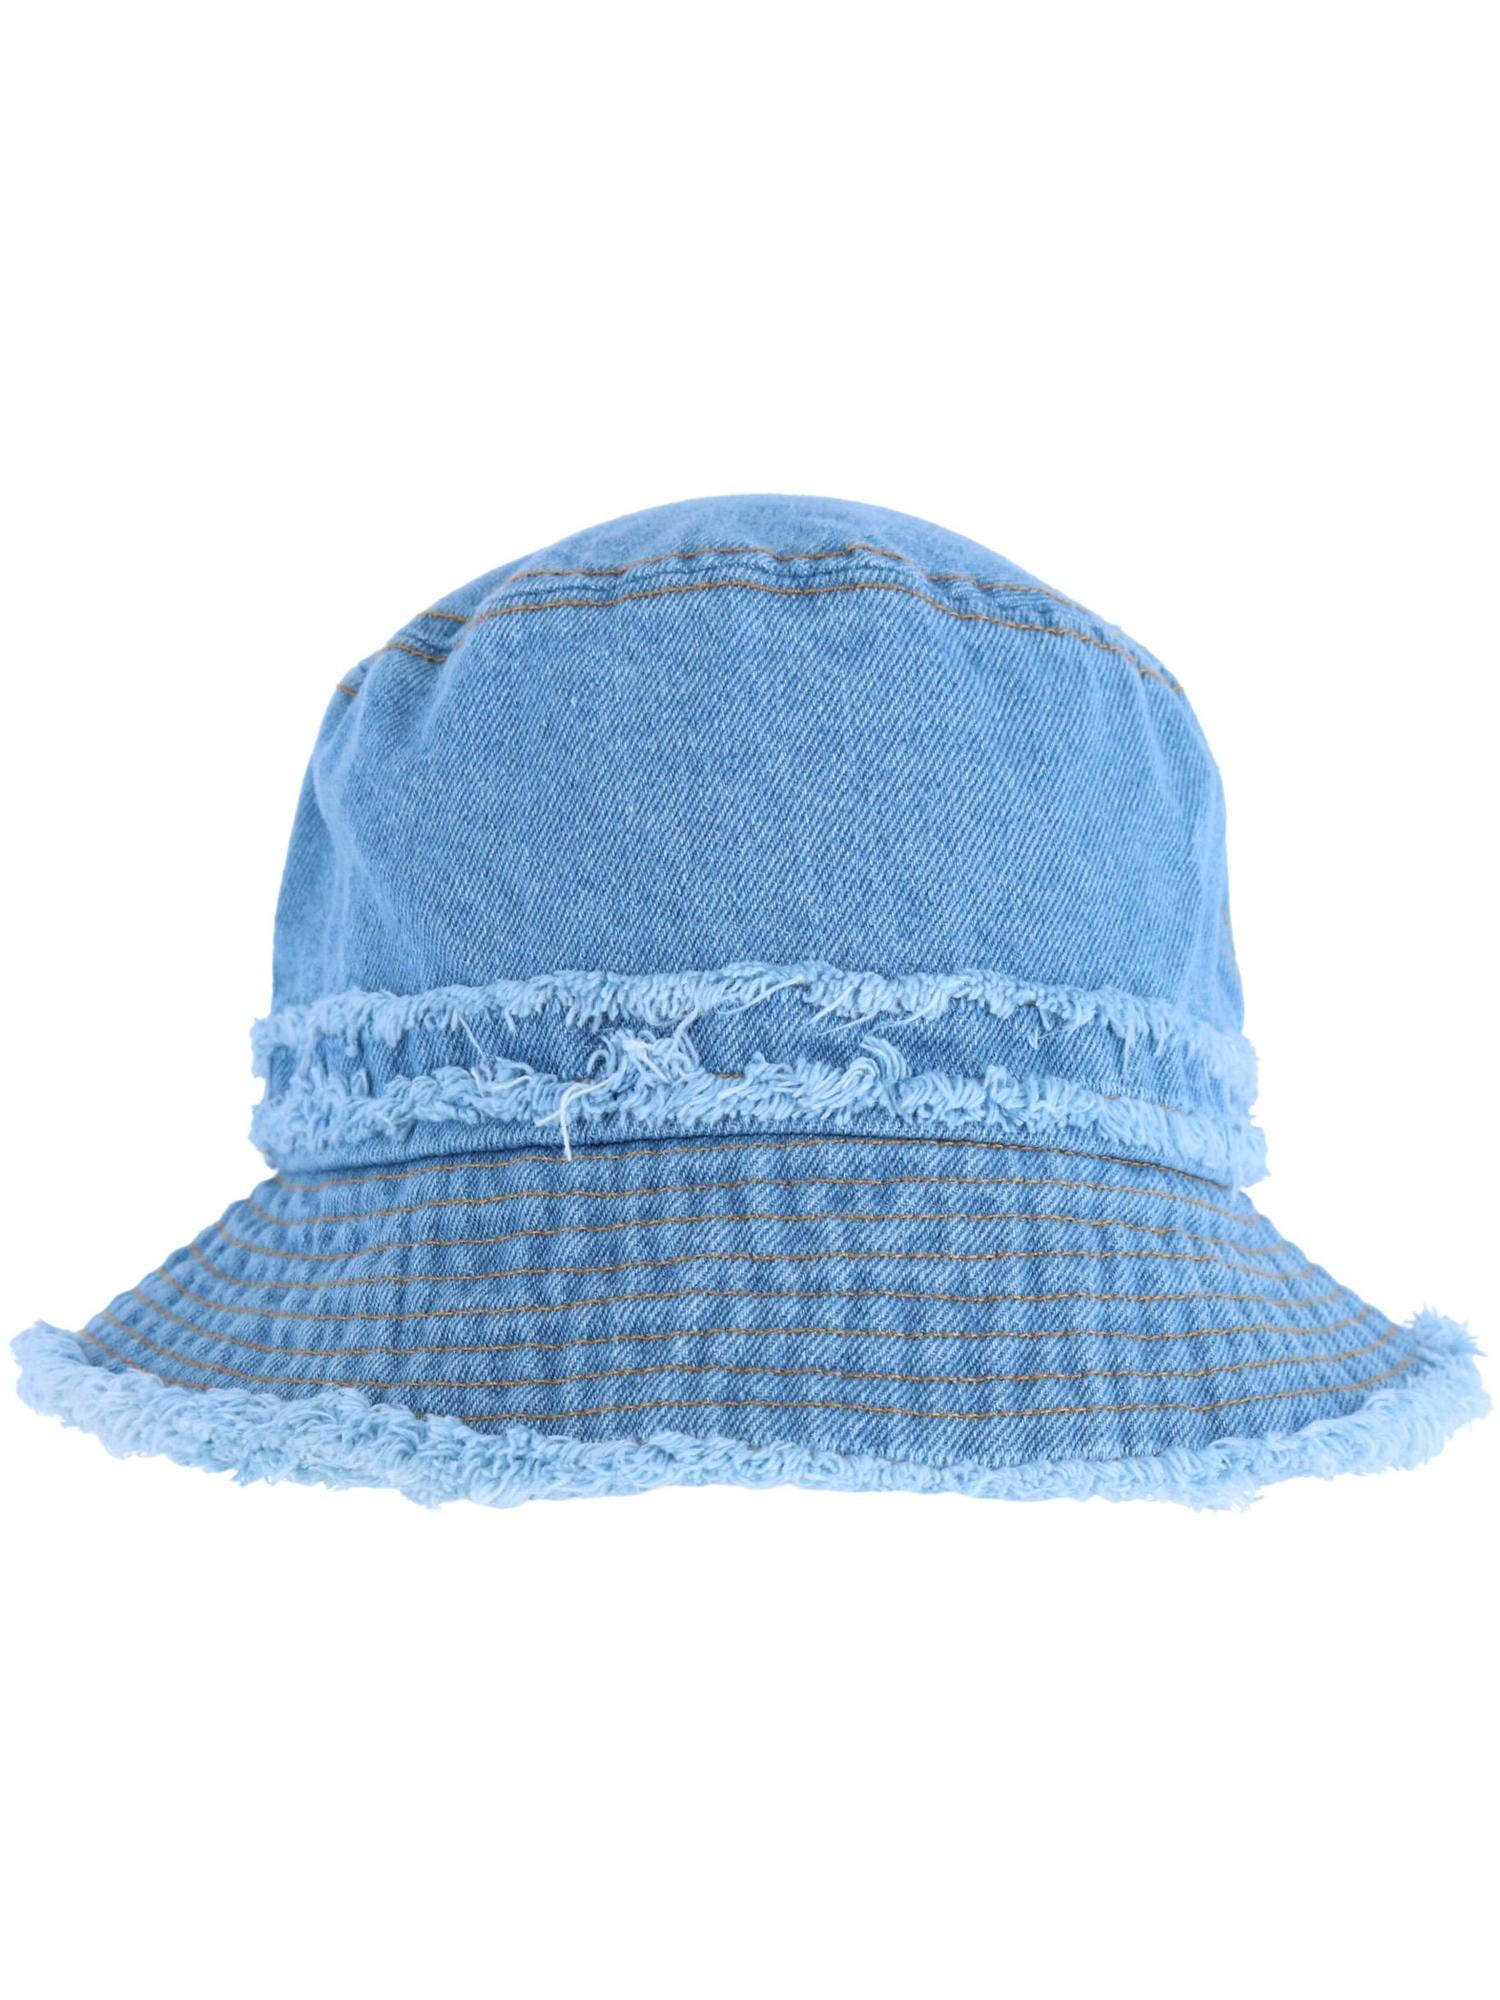 David & Young Distressed Denim Bucket Hat with Frayed Edges (Women ...